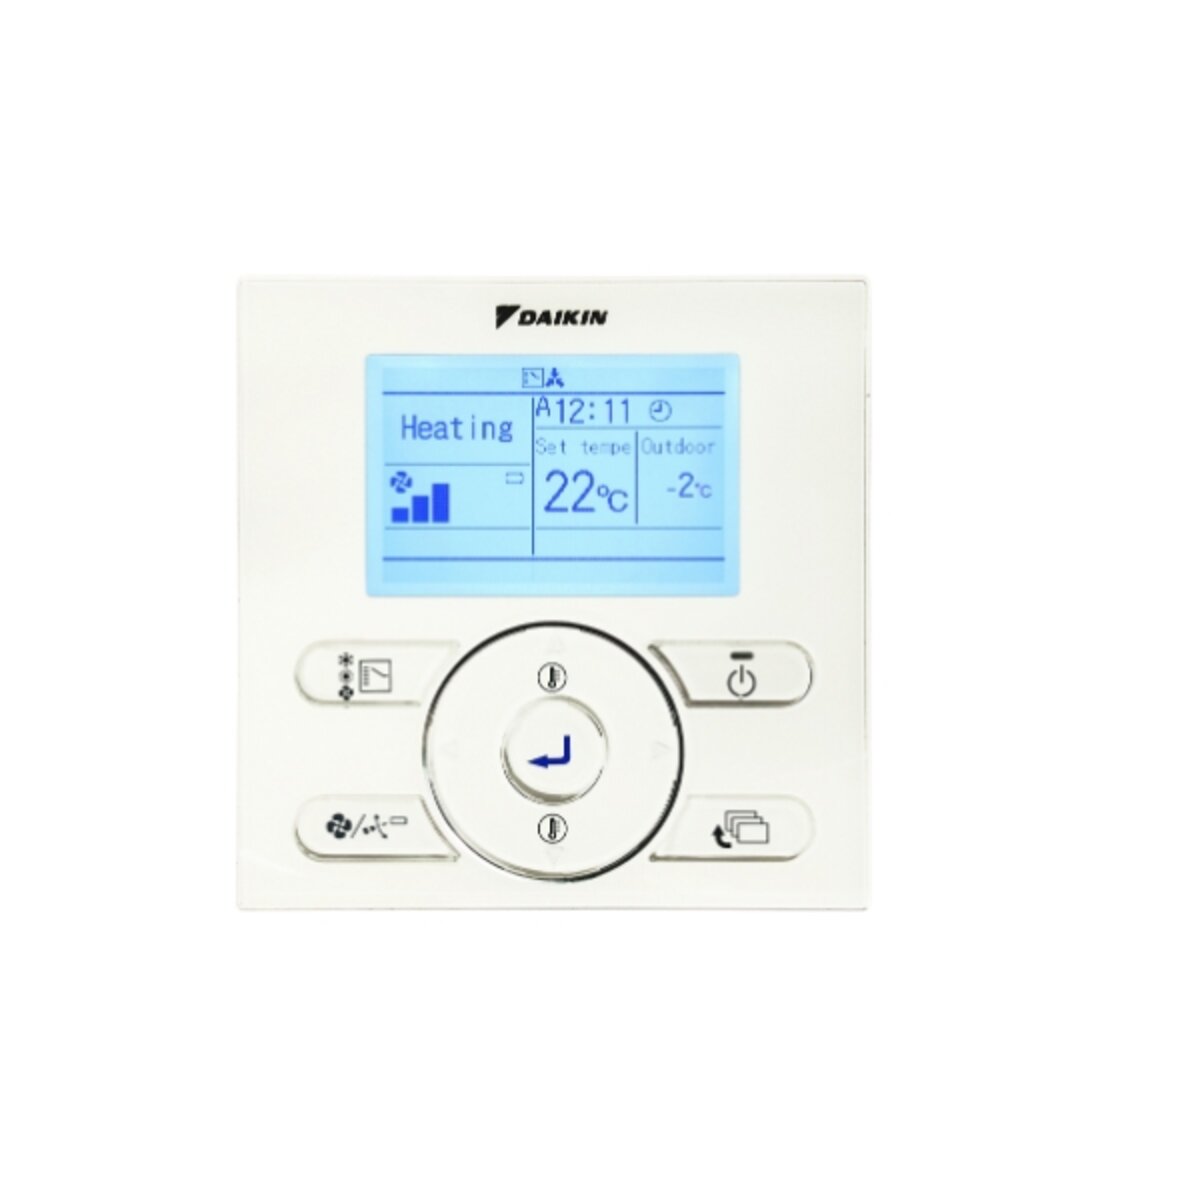 Standard wired controller for Daikin indoor units